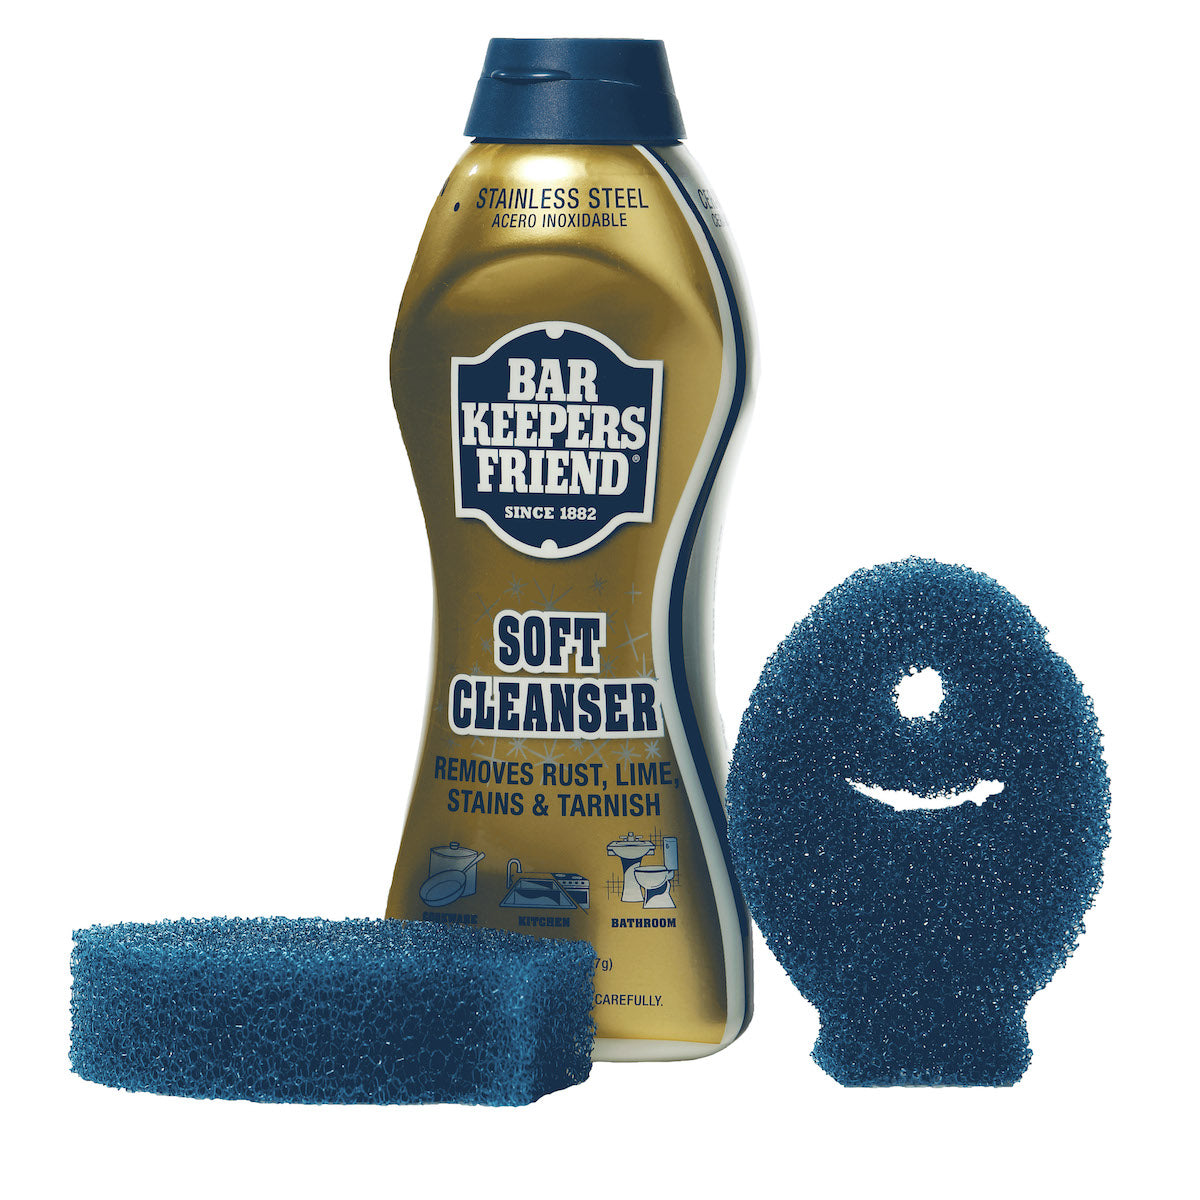 Bar Keepers Friend - Soft Cleaner